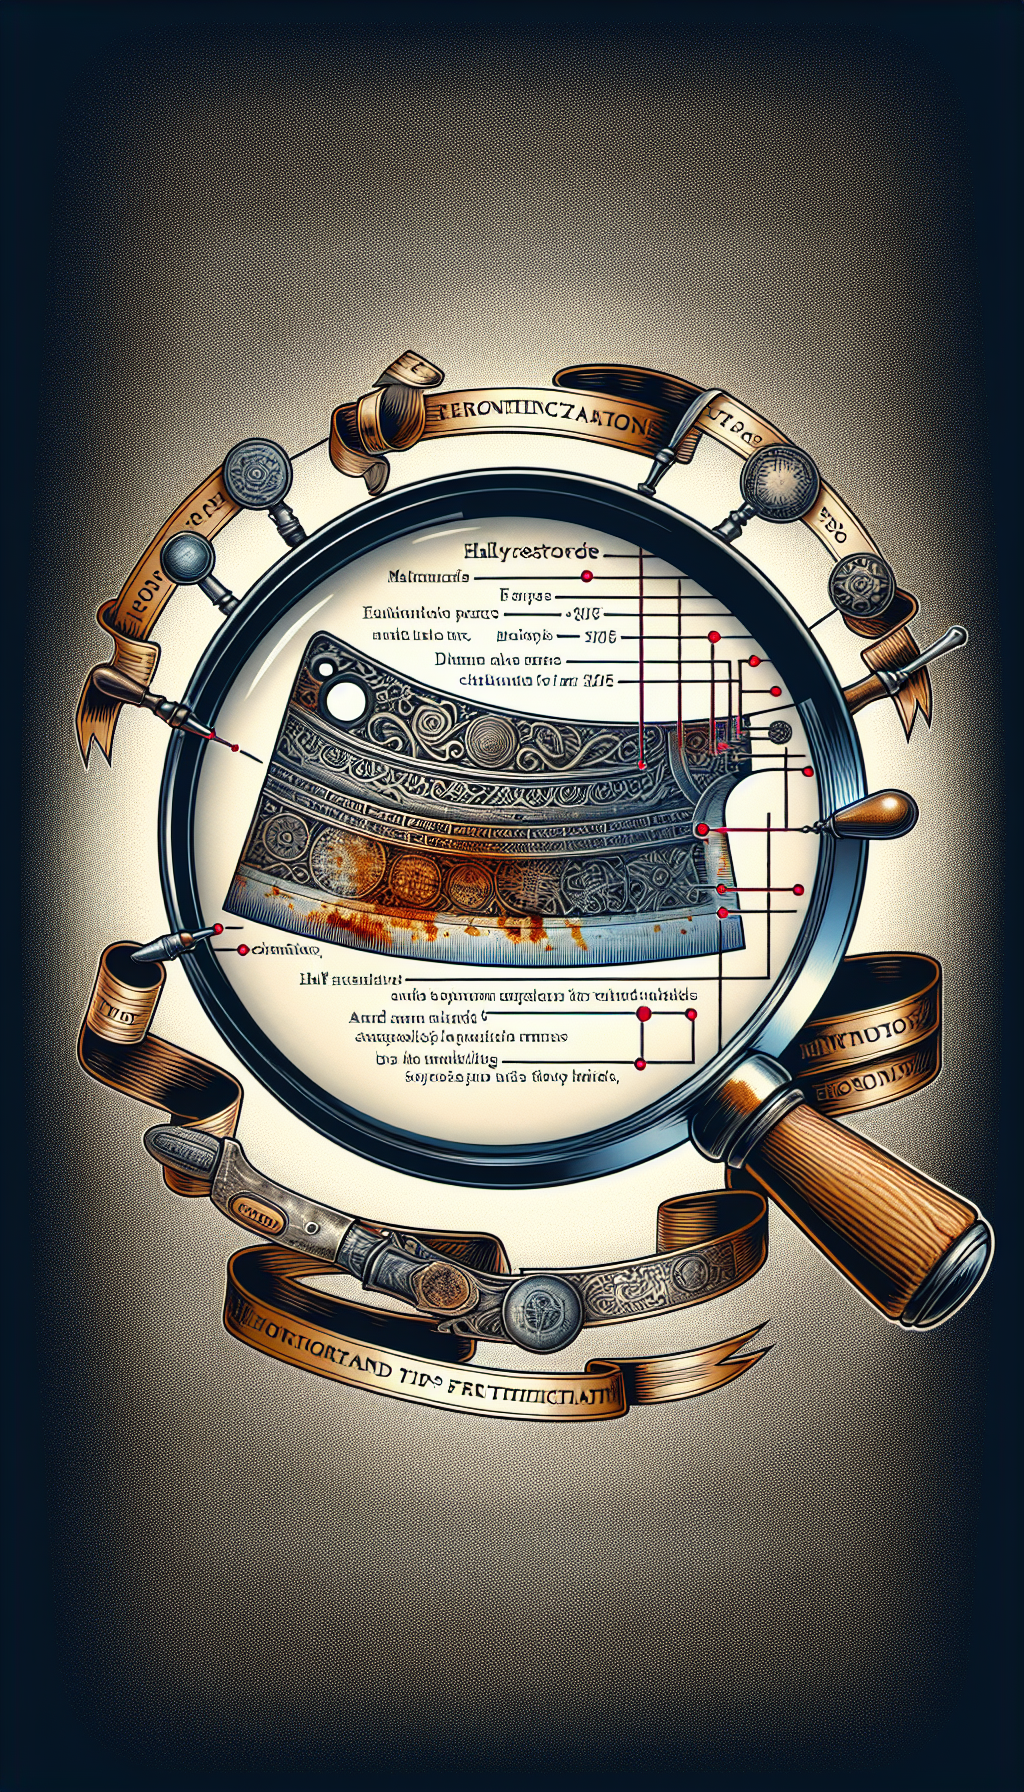 An illustration featuring a magnifying glass focusing on unique patina patterns and maker's marks of a half-restored cleaver, blending from rust to gleaming metal. The handle is wrapped in a ribbon, which transforms into a timeline of key authentication tips. Each period marked on the ribbon represents different eras of production, etched with stylistic flourishes from the corresponding time periods.